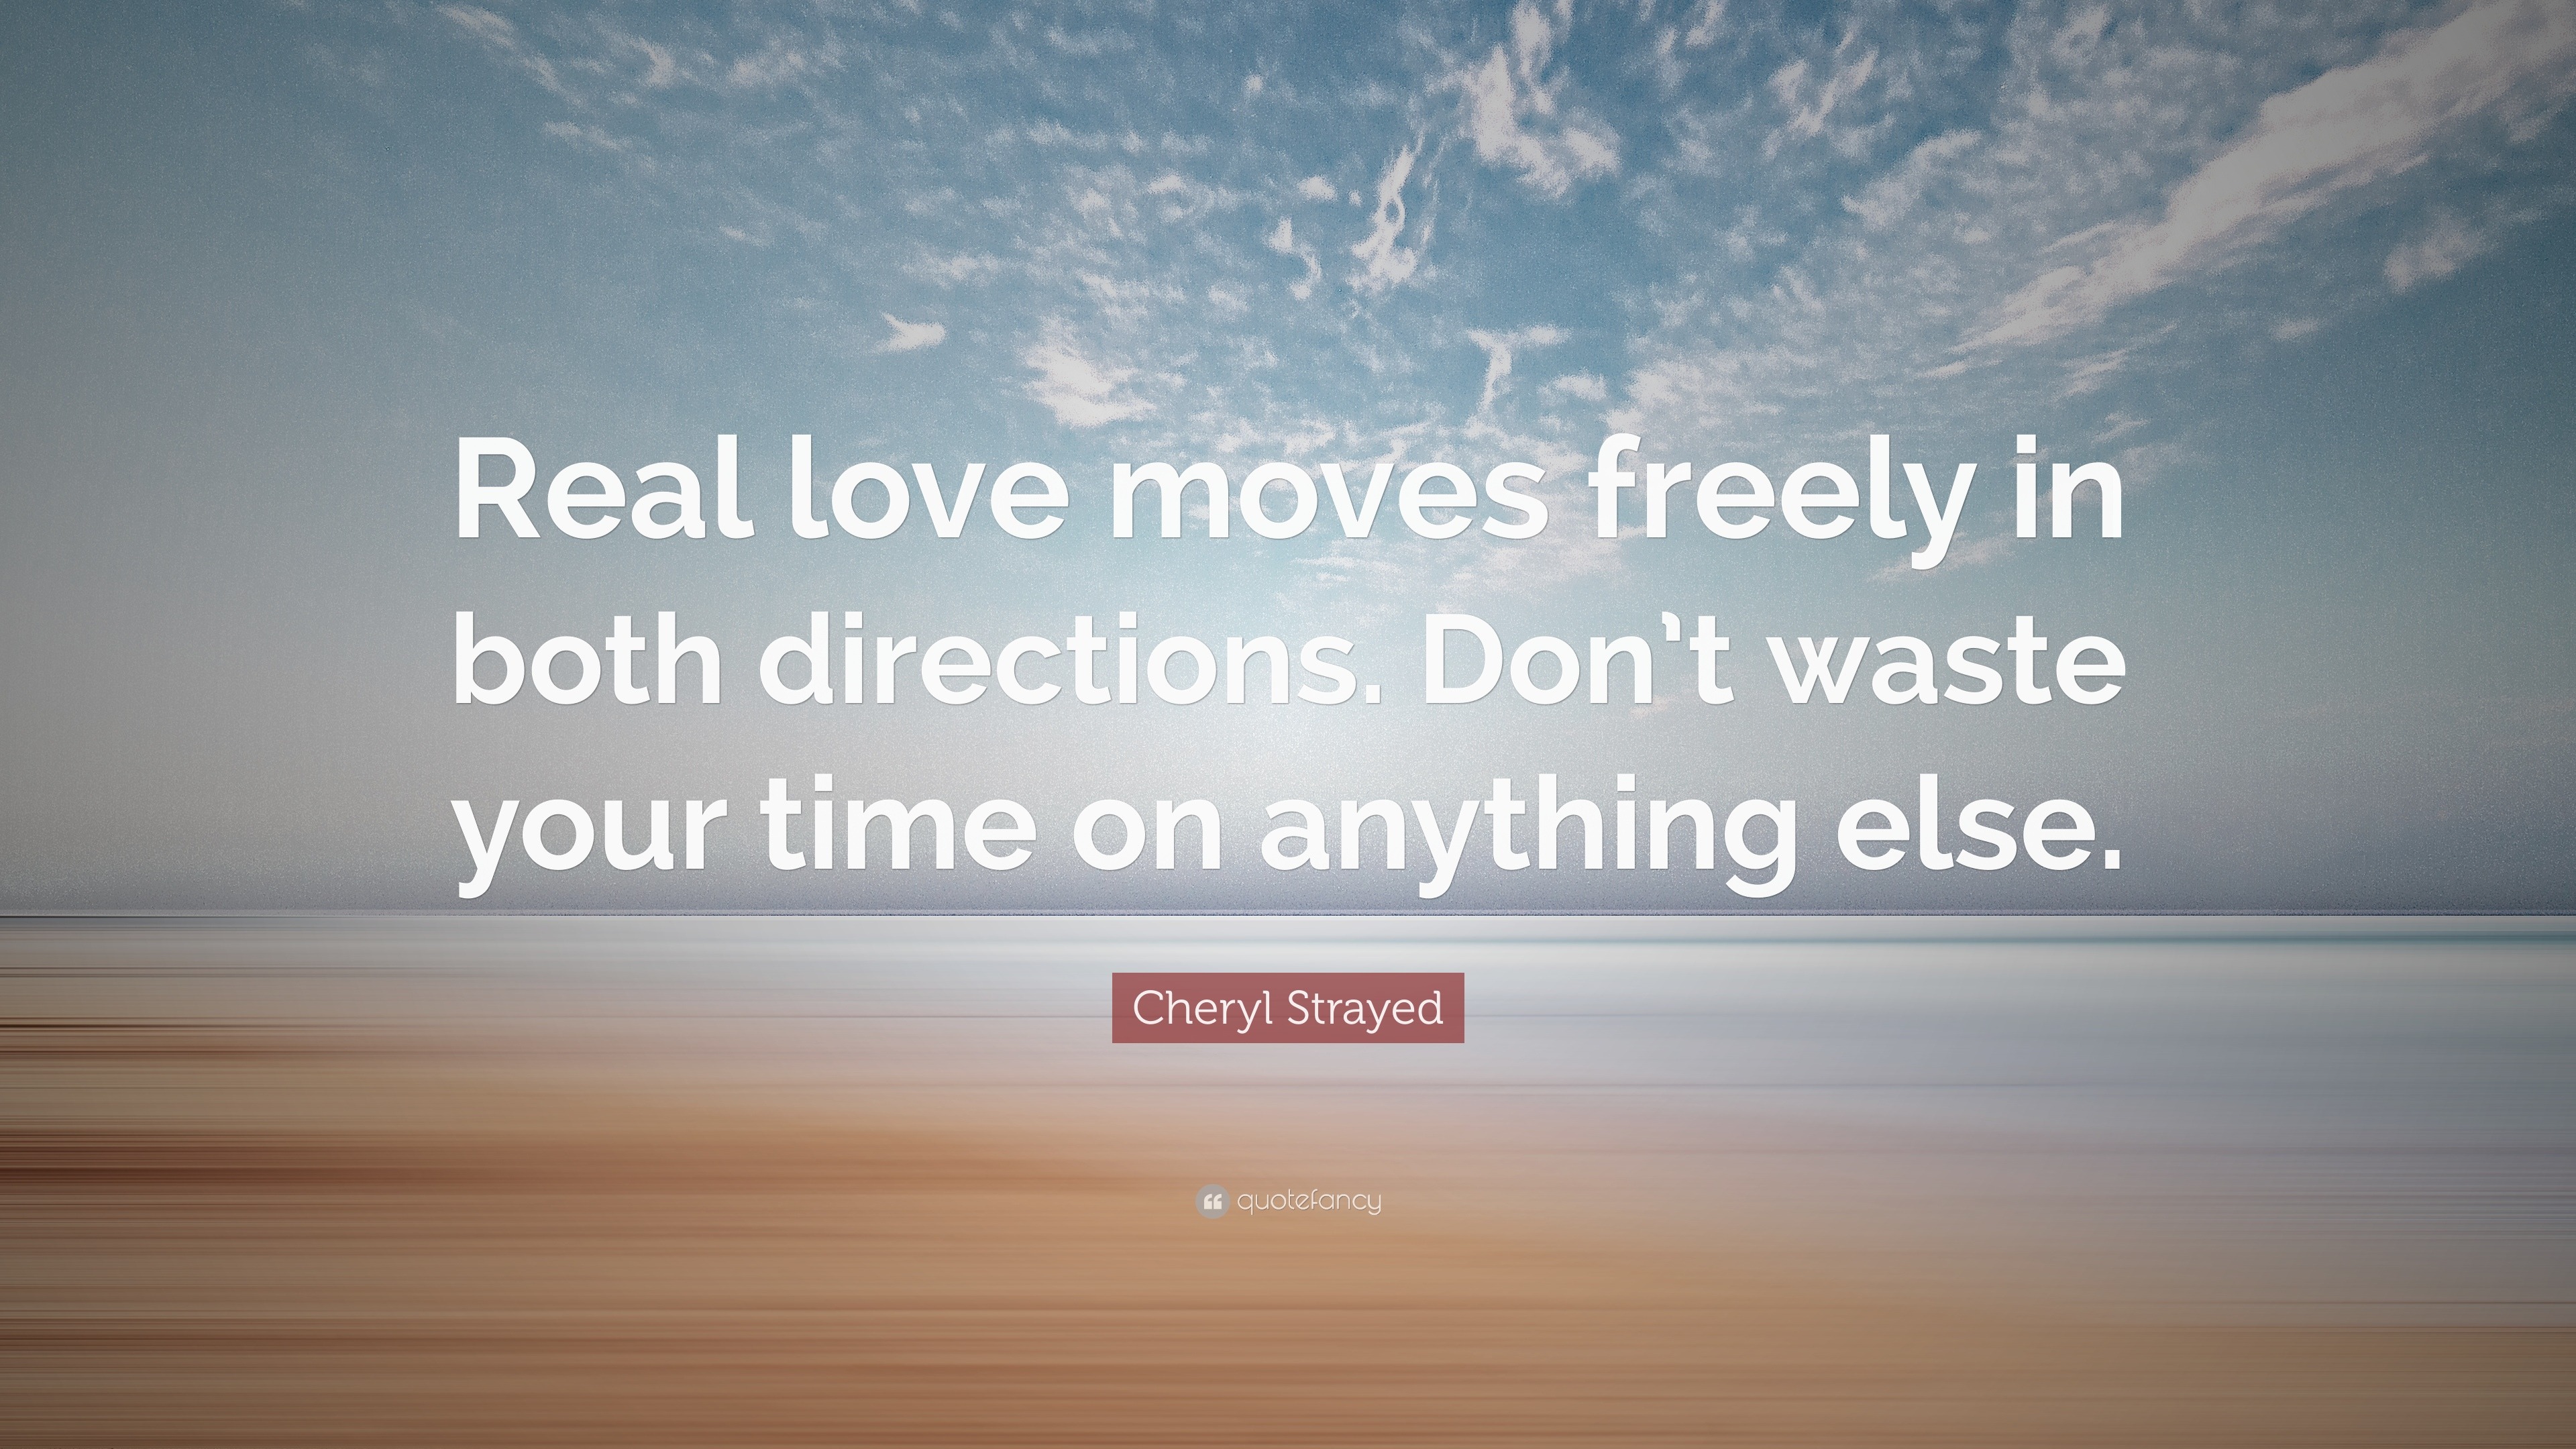 Cheryl Strayed Quote “Real love moves freely in both directions Don t